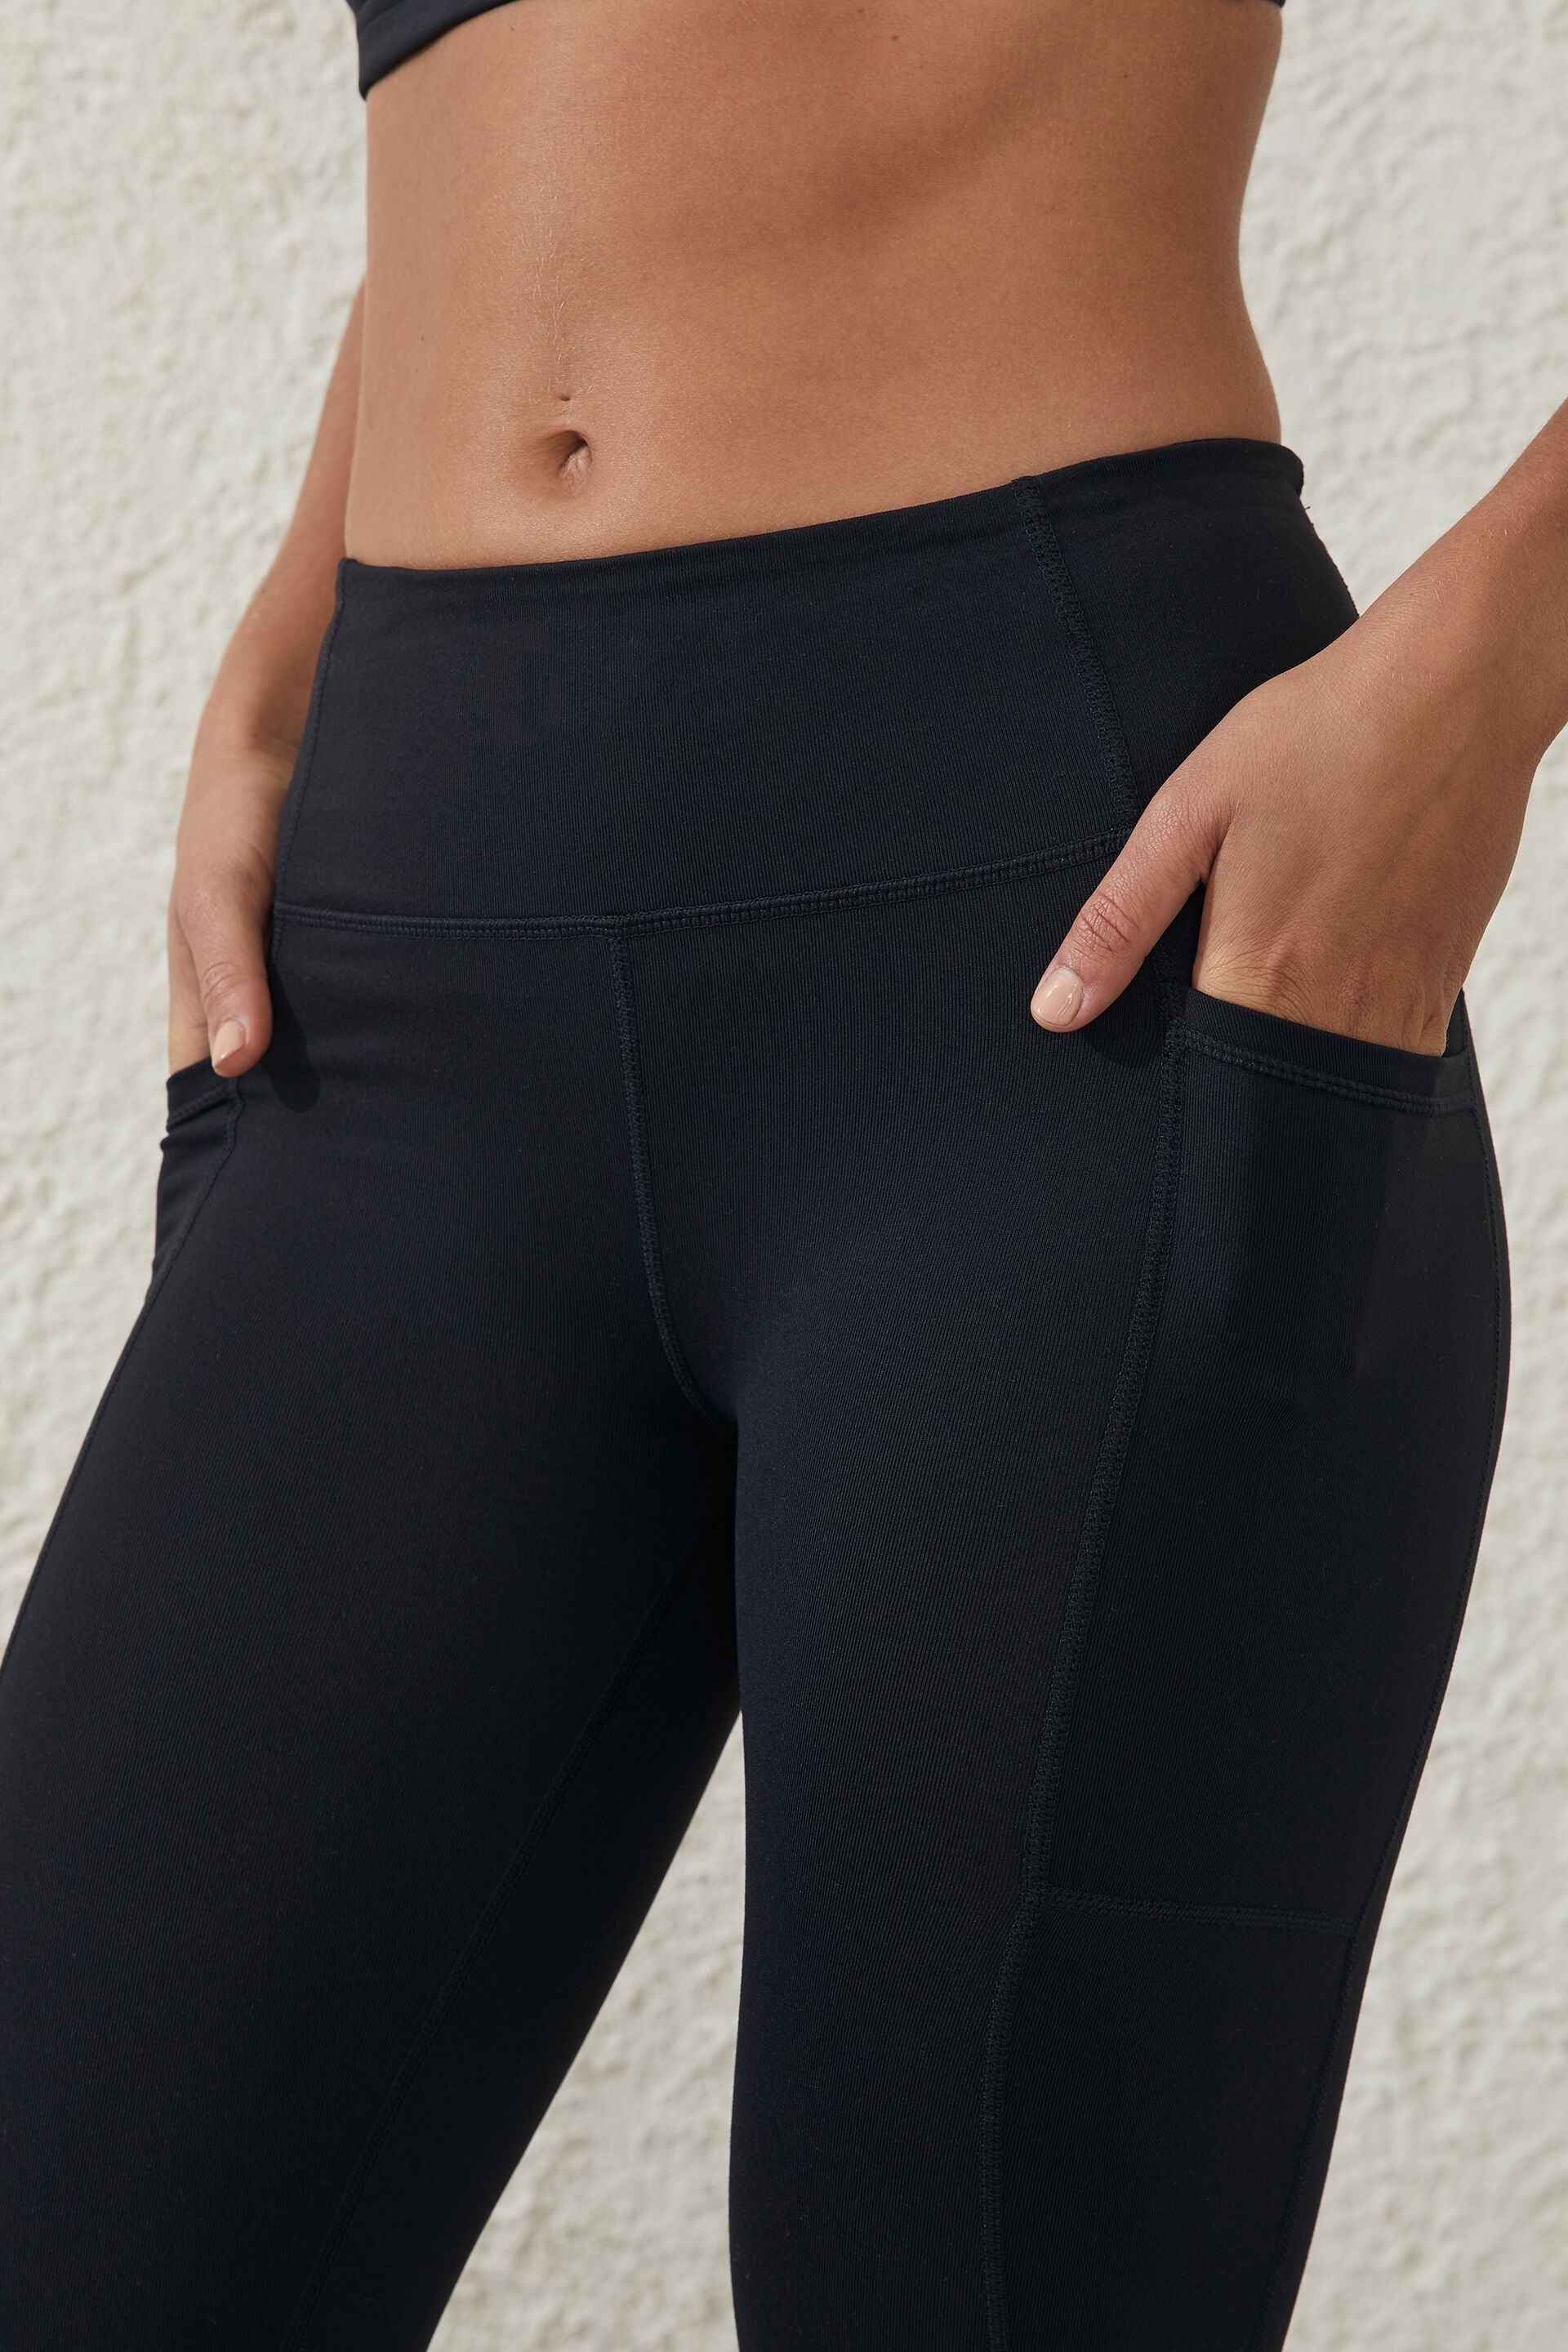 Buy BALEAF Women's Knee Length Cotton Capri Leggings with Pockets, High  Waisted Casual Summer Yoga Workout Exercise Pants Online at desertcartINDIA